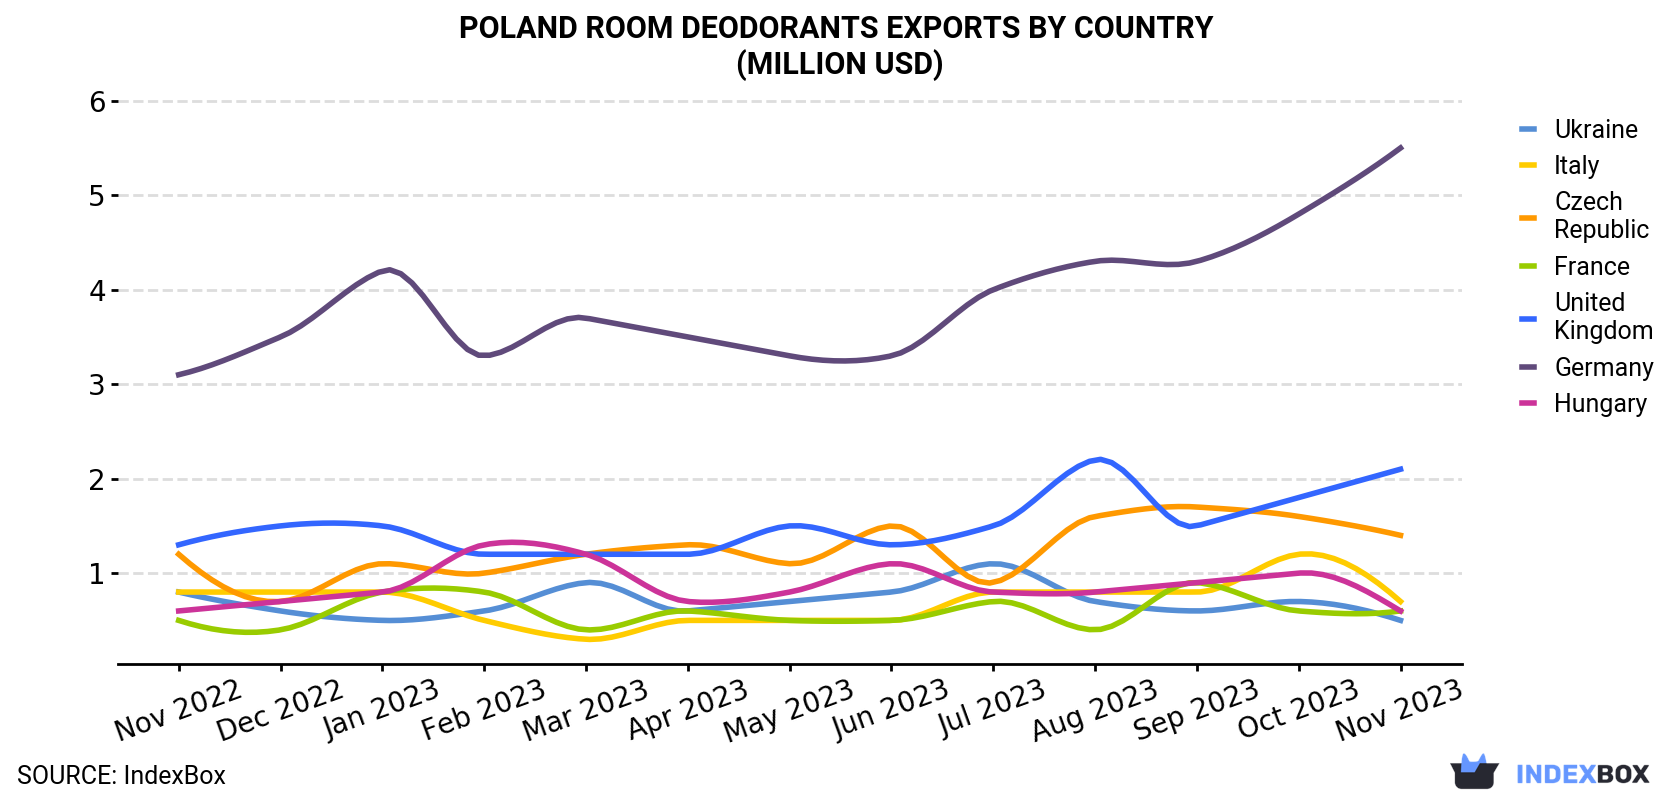 Poland Room Deodorants Exports By Country (Million USD)